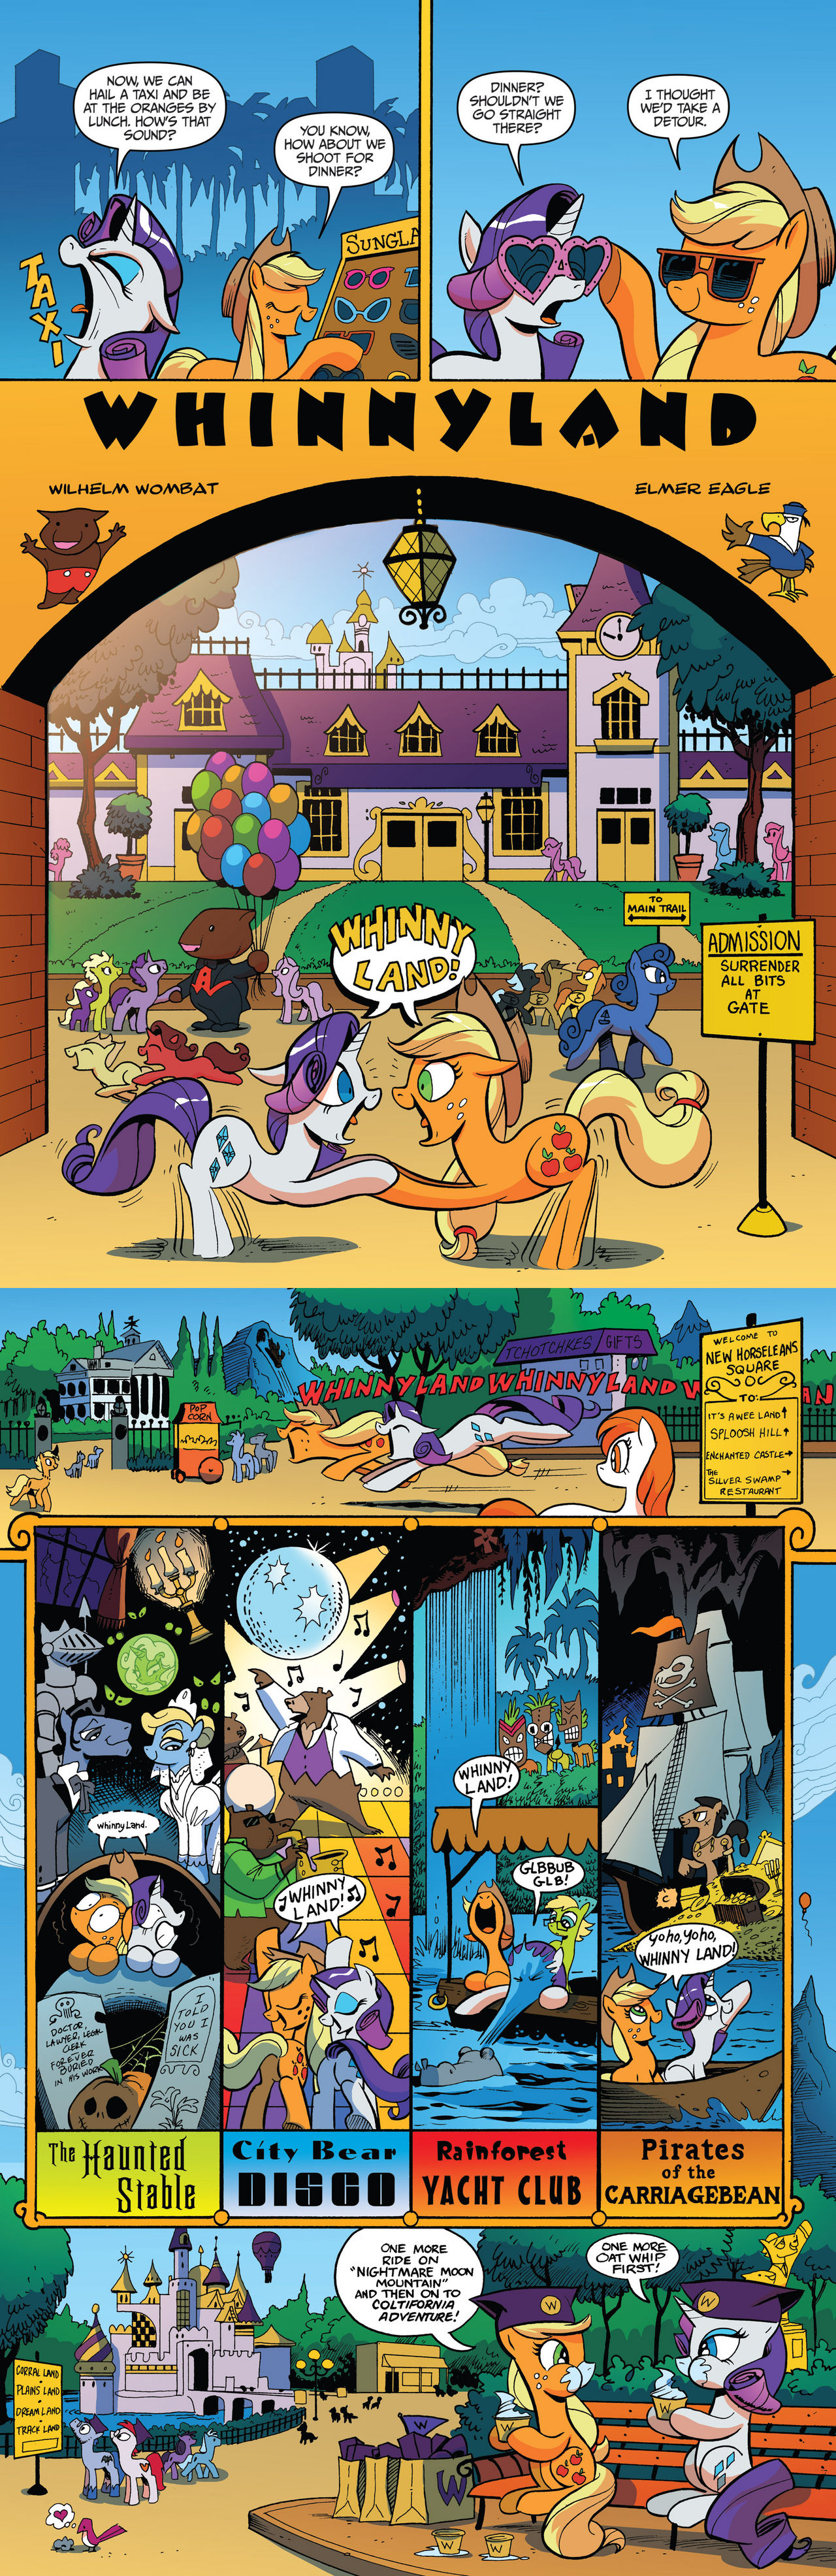 MLP Whinny Land by Mdwyer5 on DeviantArt